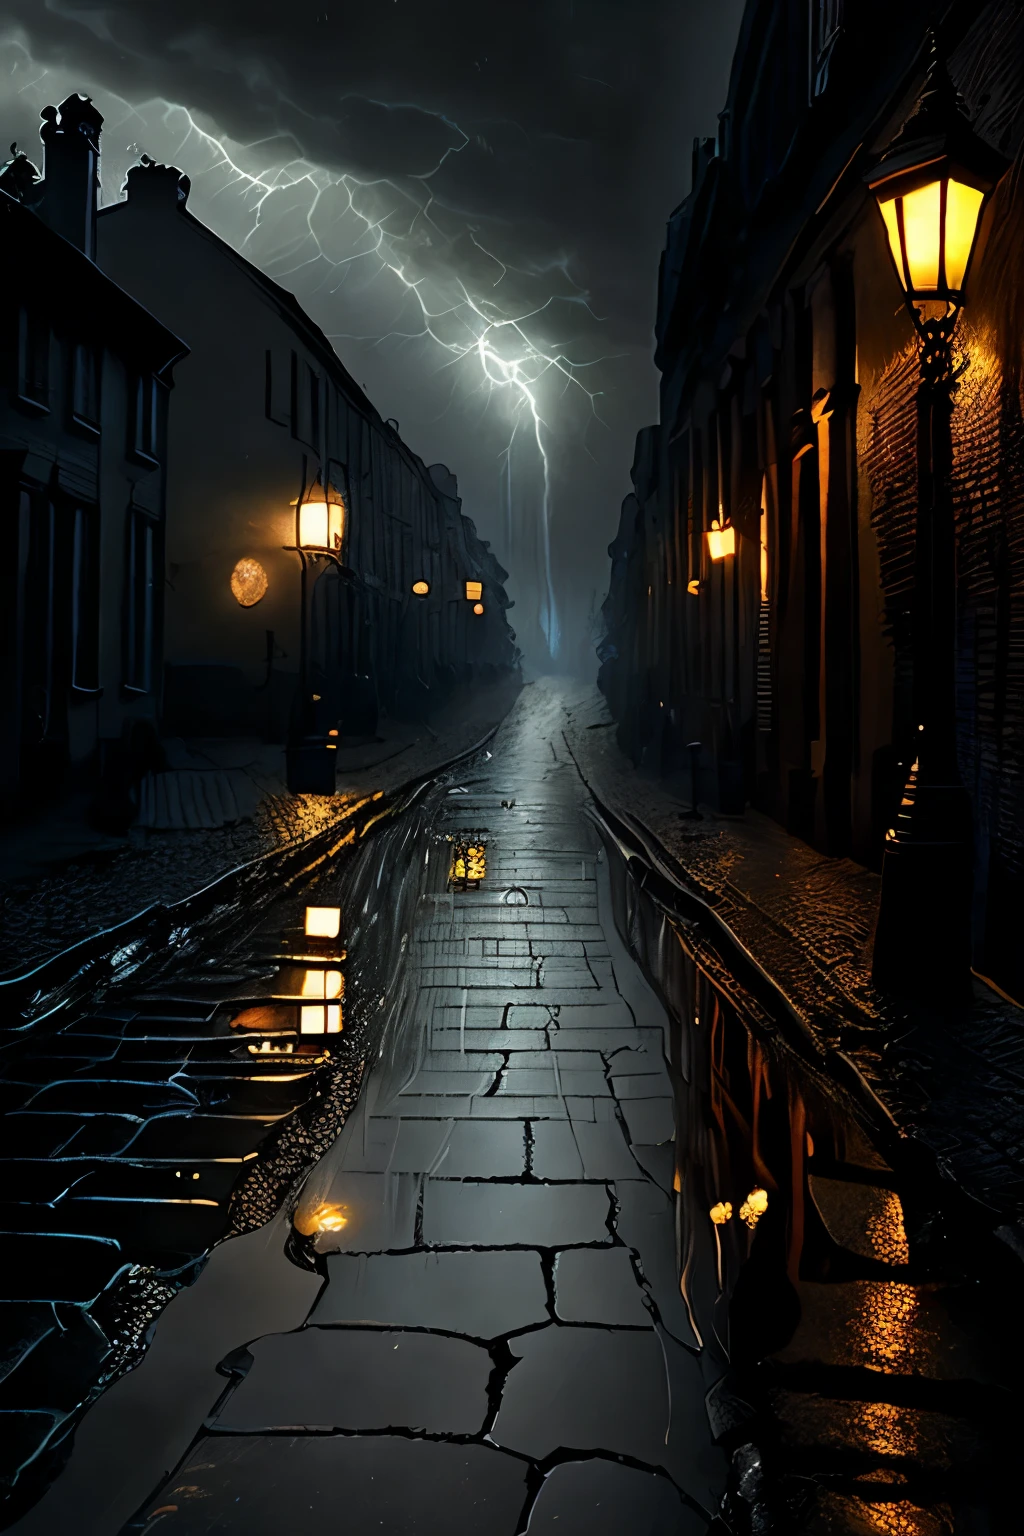 Very dark and frightening night street, almost no lighting, ambient light in a shade of penumbra only, ground made of wet cobblestones, light rain falling, thunder in the intensely cloudy sky, intricate, realism, person desperately fleeing from something, tentacles twisting in the corners, gutters flooded and dripping through the muddy corners of the street.